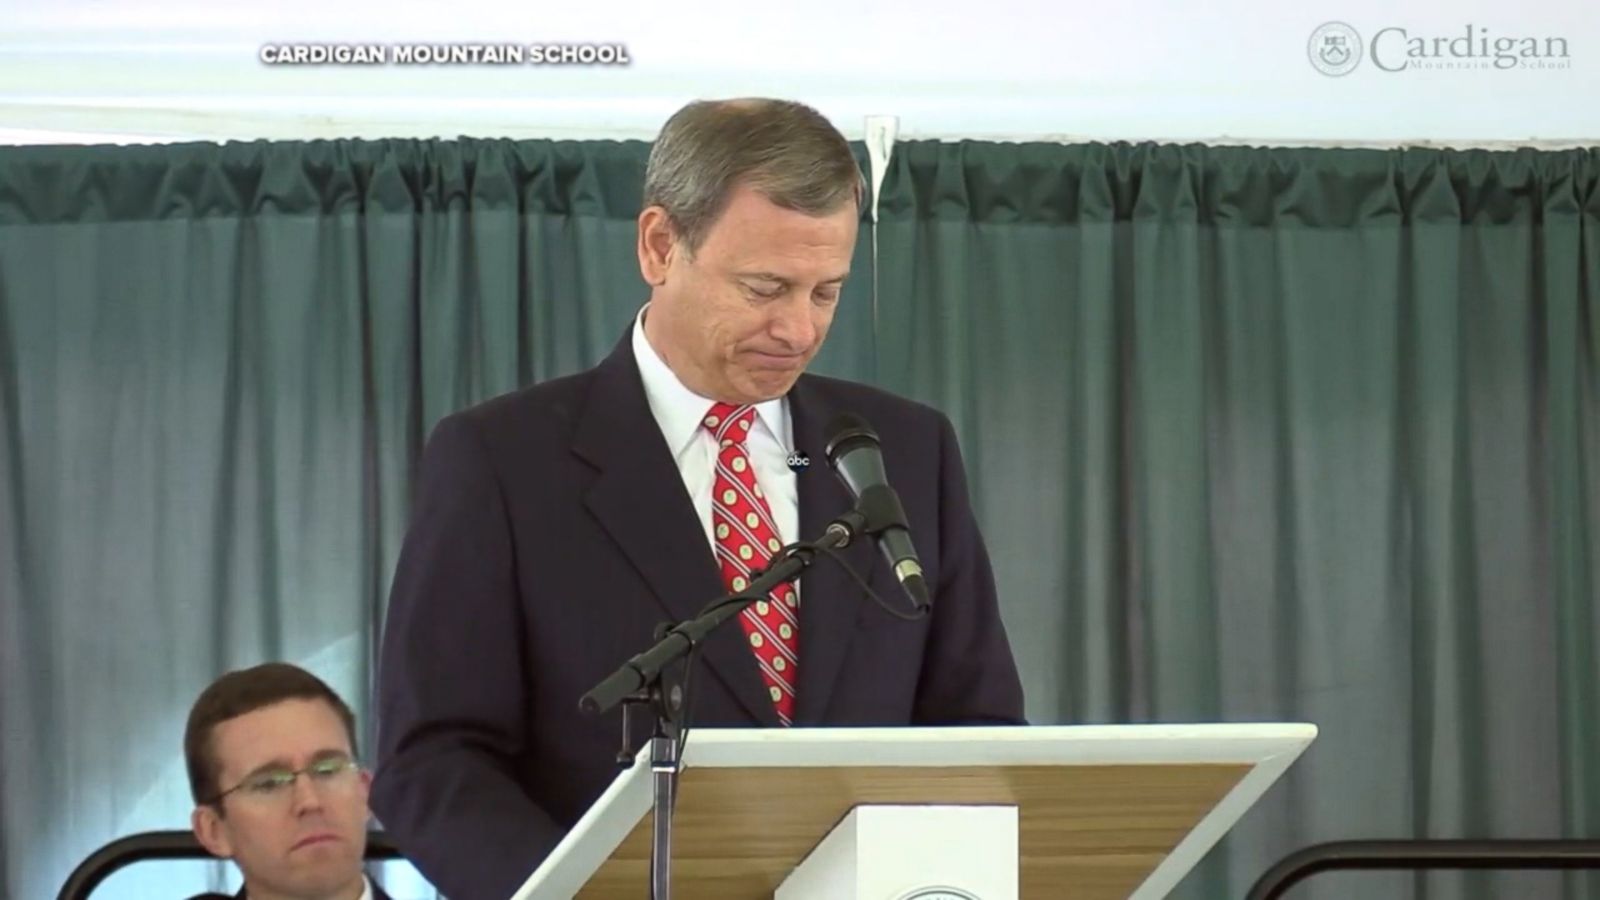 chief-justice-roberts-speech-at-son-s-9th-grade-commencement-praised